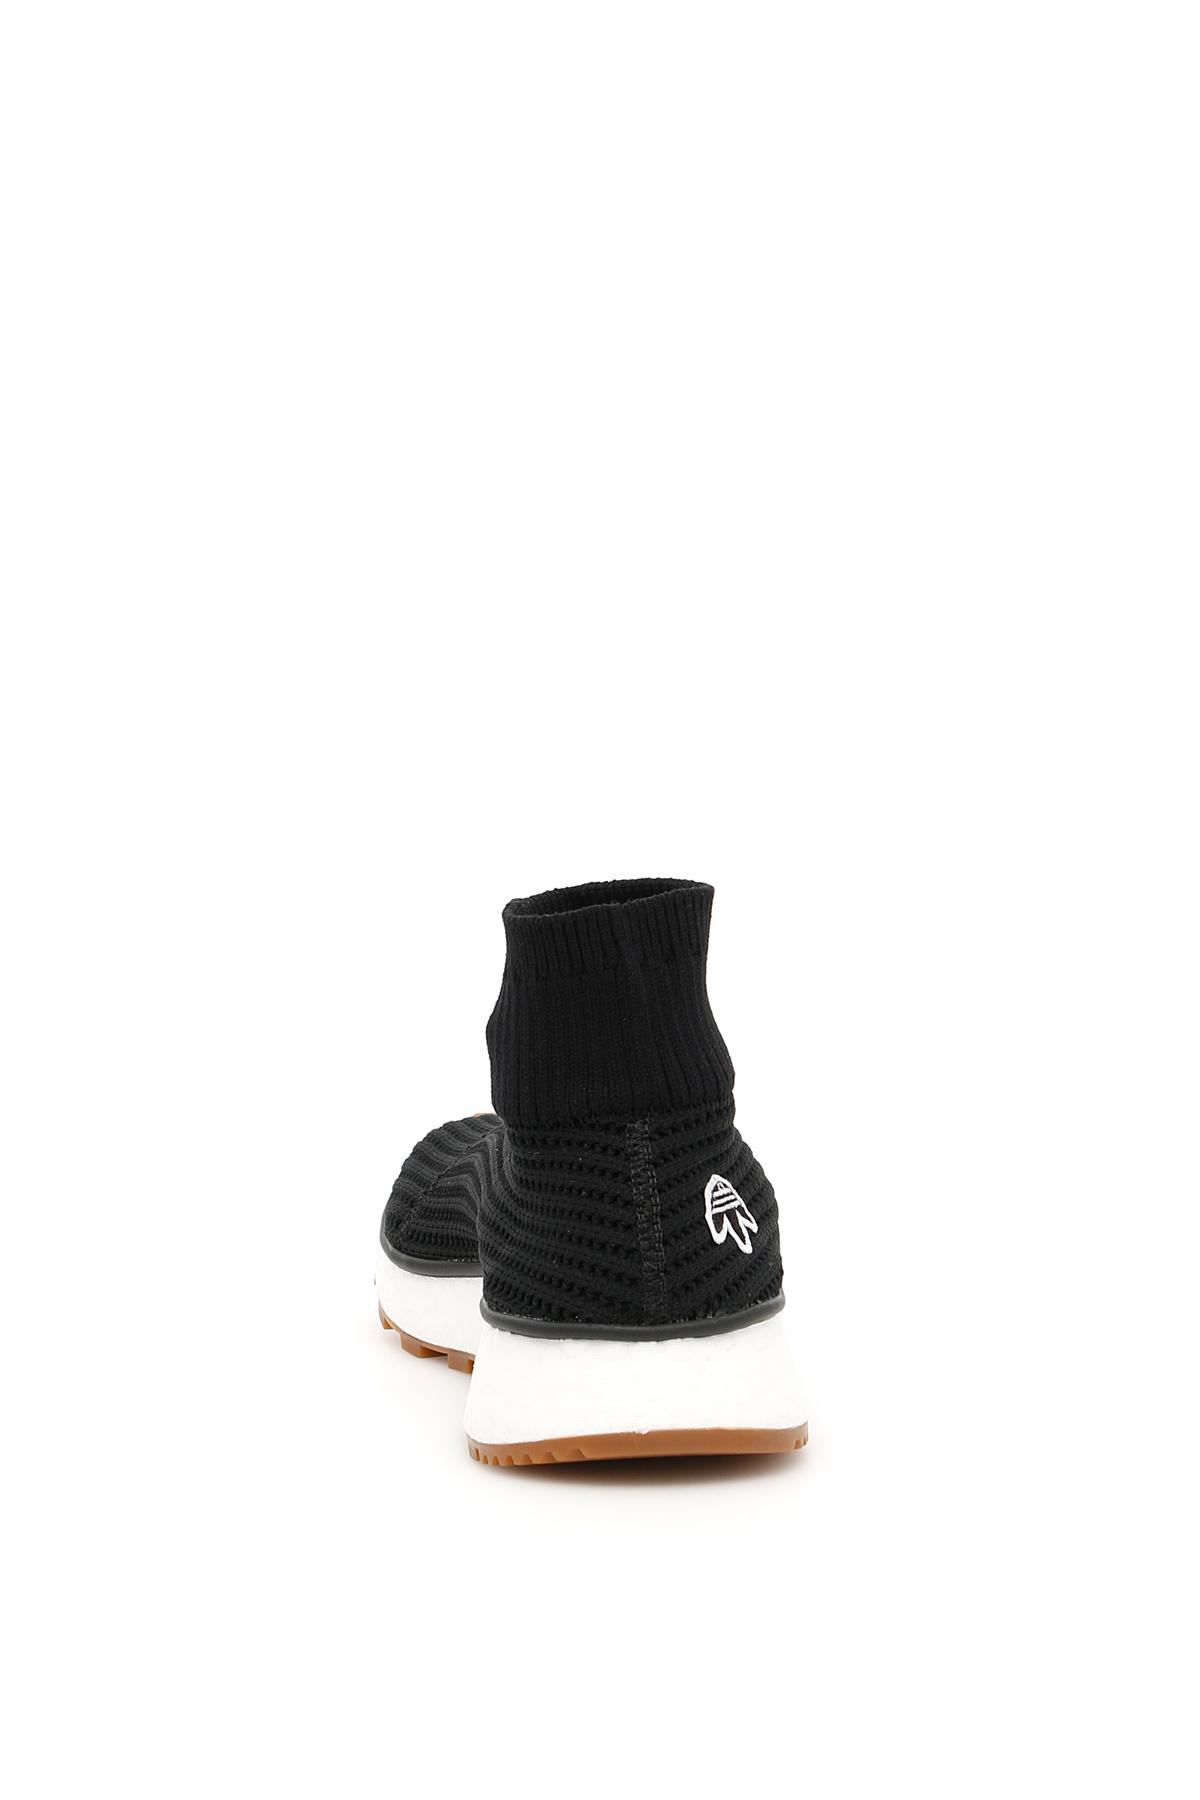 Alexander Wang Adidas Originals By Aw Run Clean Shoes in Black Black White  (Black) for Men | Lyst